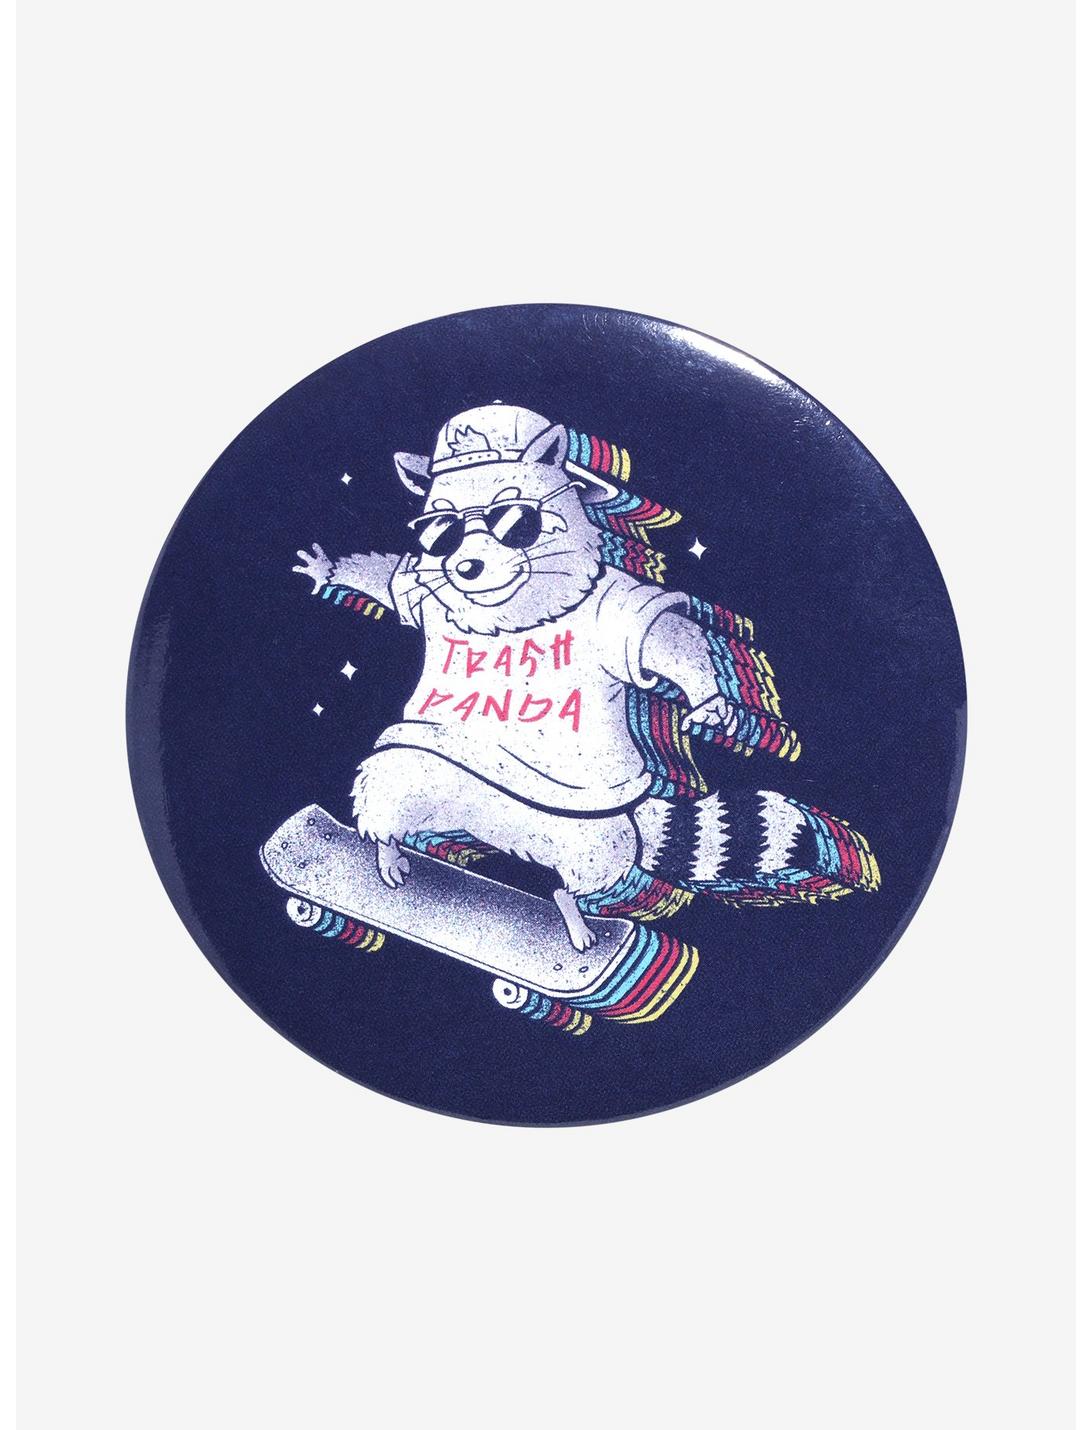 Raccoon Skater 3 Inch Button, , hi-res